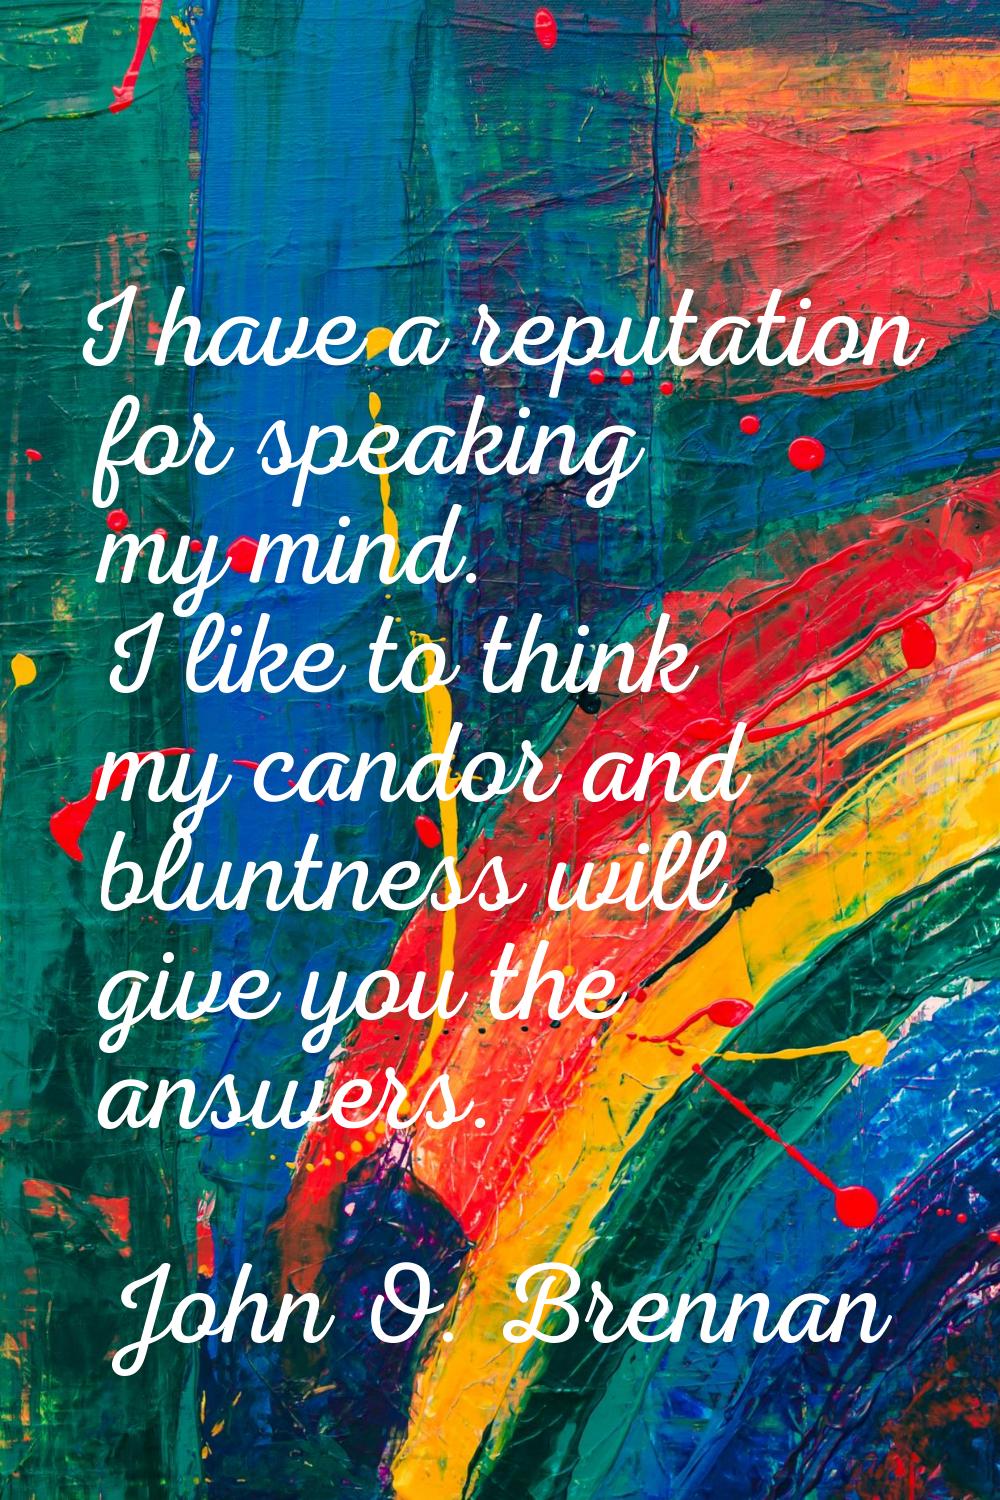 I have a reputation for speaking my mind. I like to think my candor and bluntness will give you the